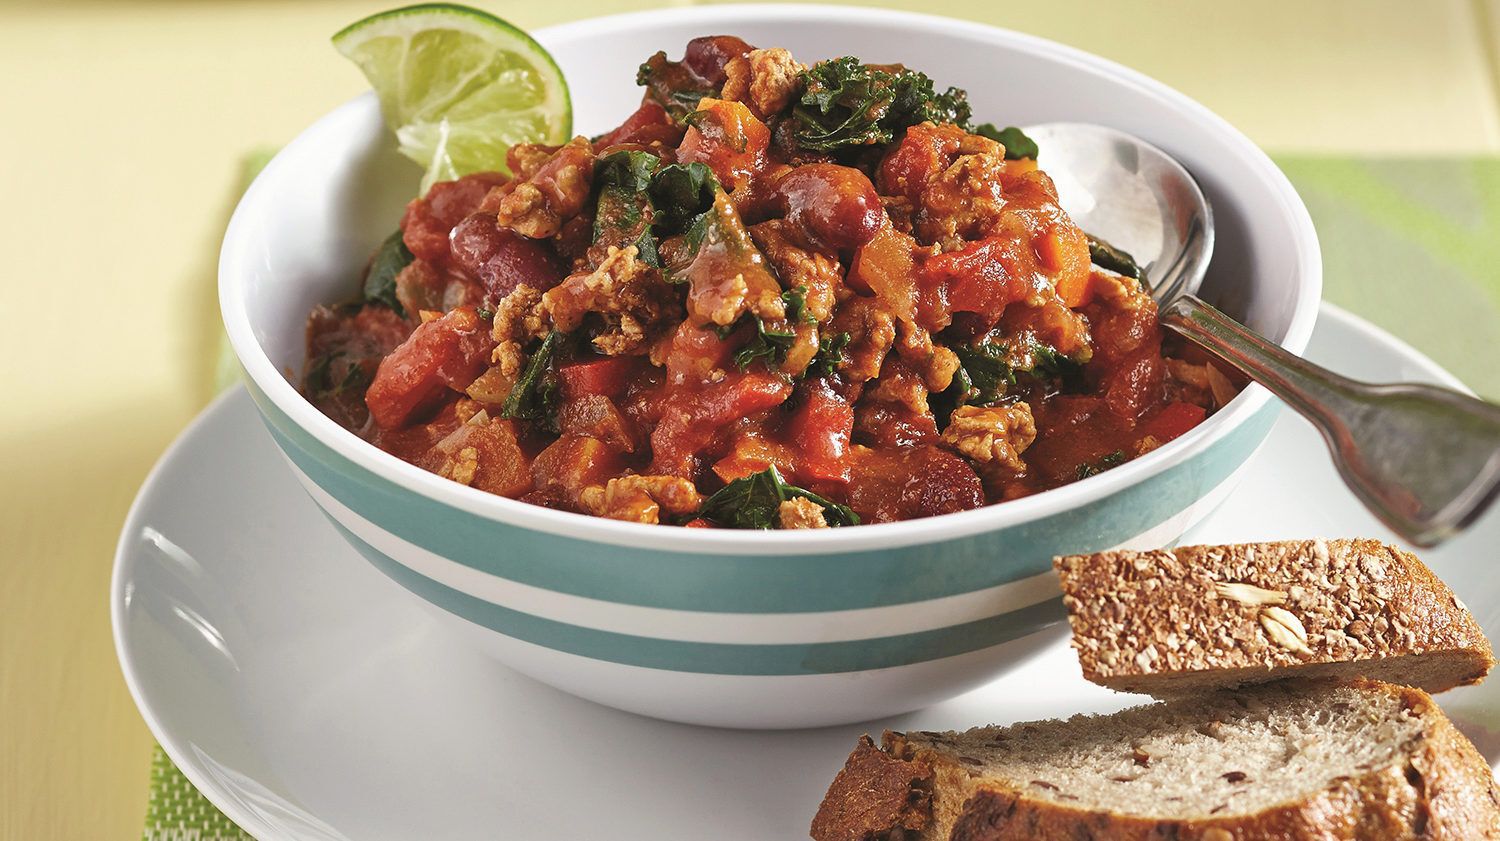 Read more about Turkey & Kale Chili